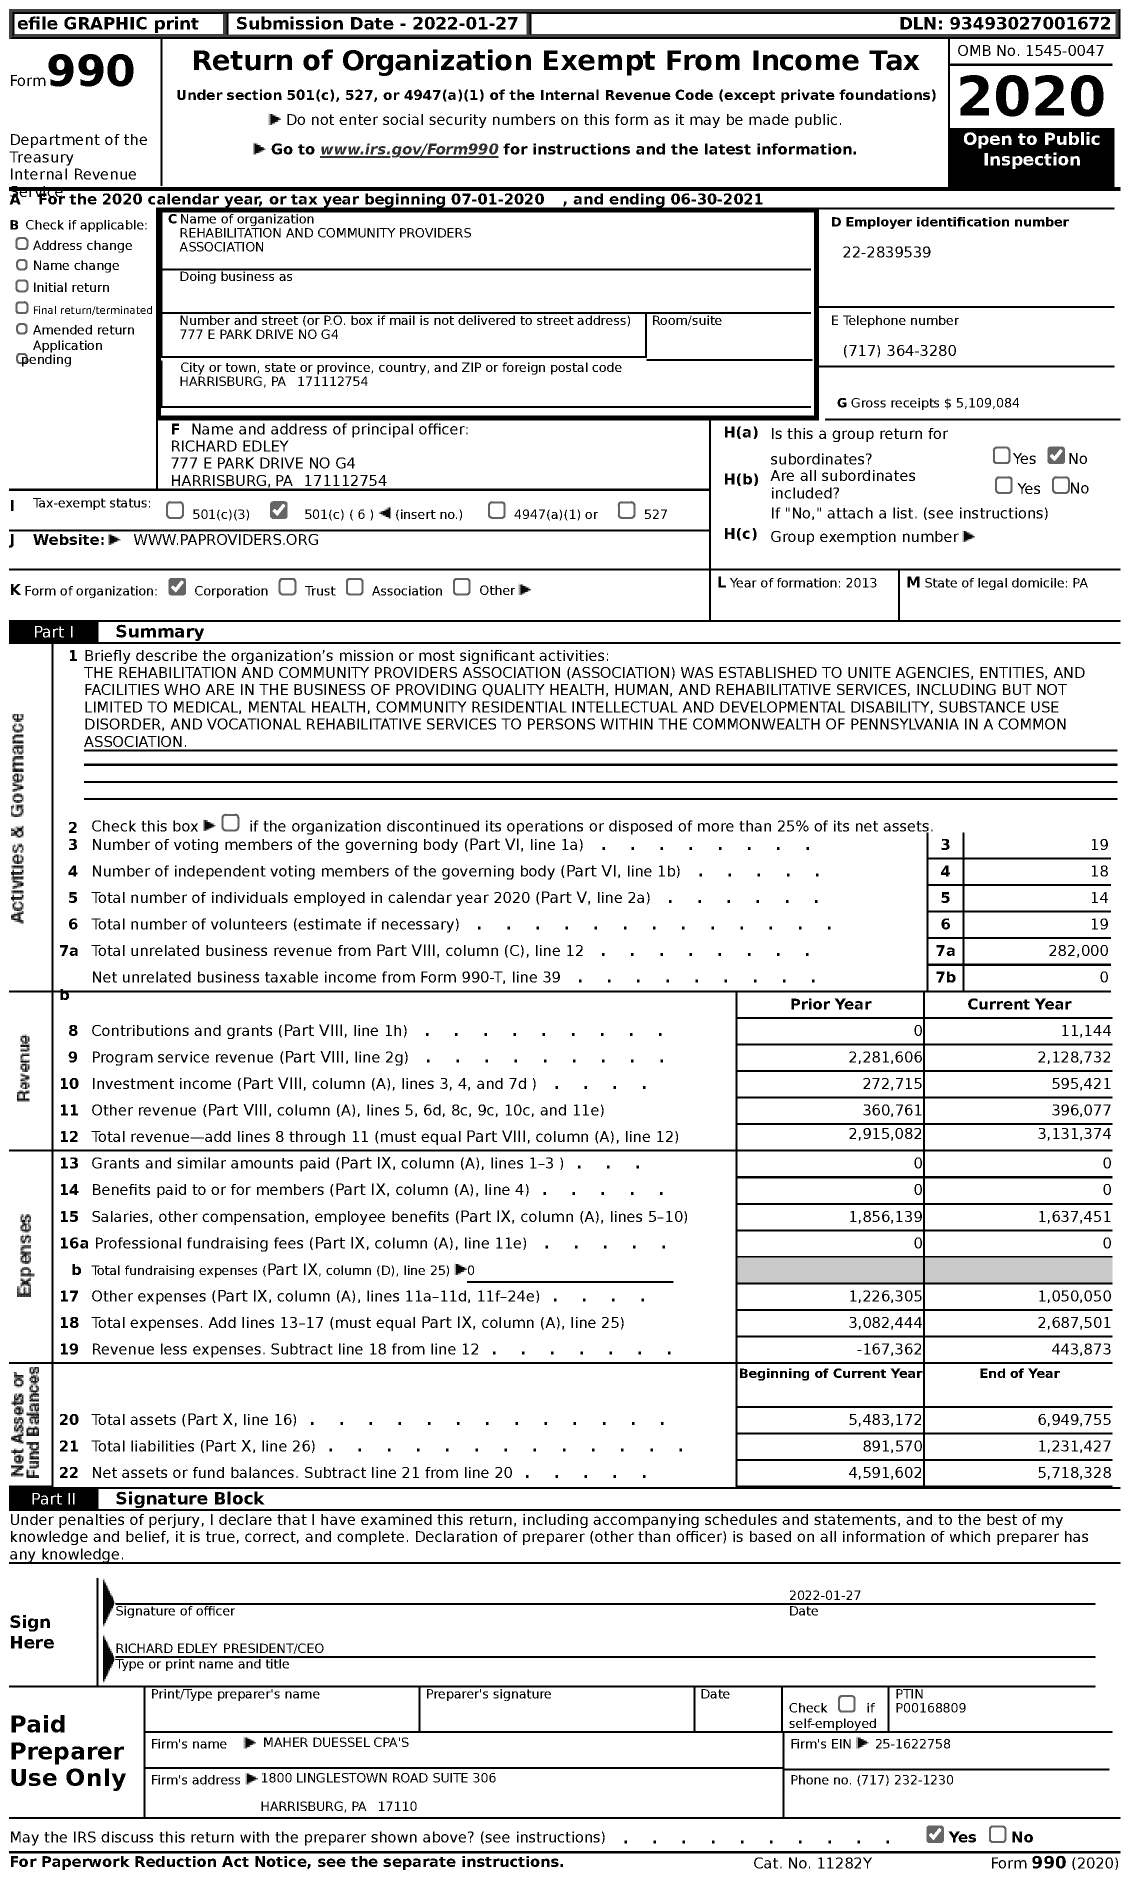 Image of first page of 2020 Form 990 for Rehabilitation and Community Providers Association (RCPA)